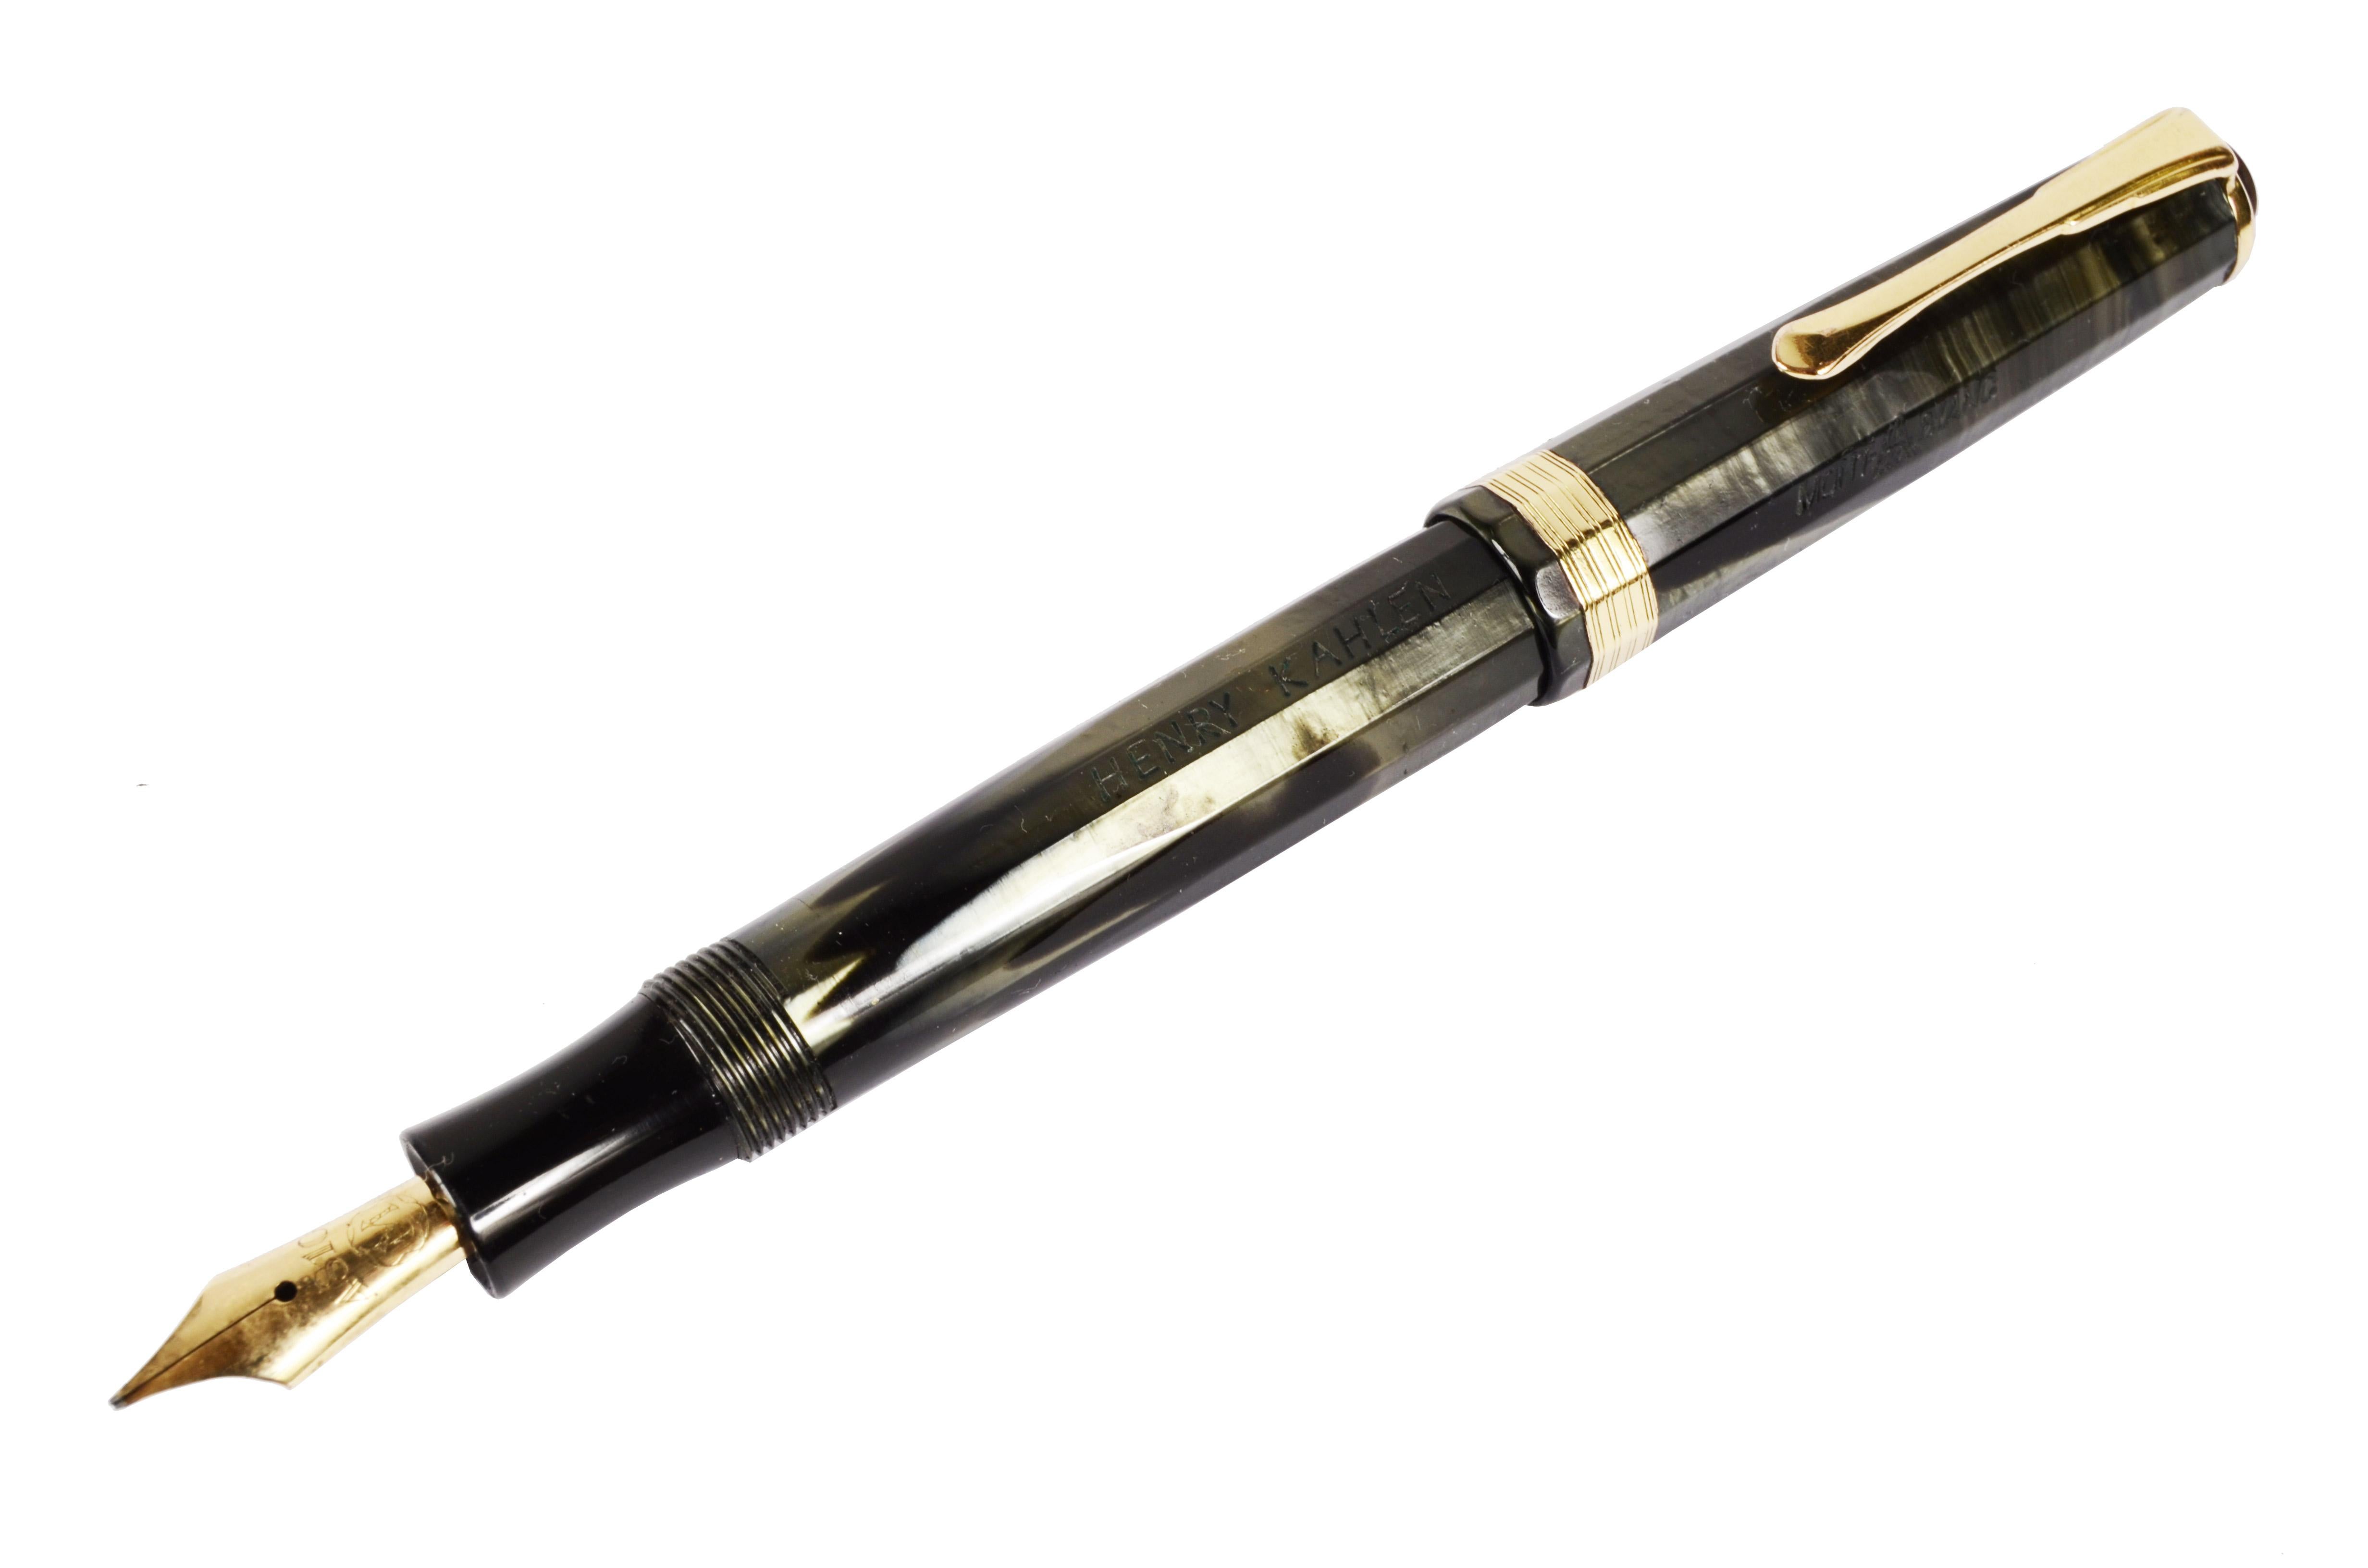 Montblanc Meisterstuck 25 F in platinum-colored faceted celluloid produced in Denmark between 1946 and 1949, original Montblanc n. 4 14 karat gold, gold-plated clip and cap band. 
Bottom button filling.
The body of the stylus is engraved with the